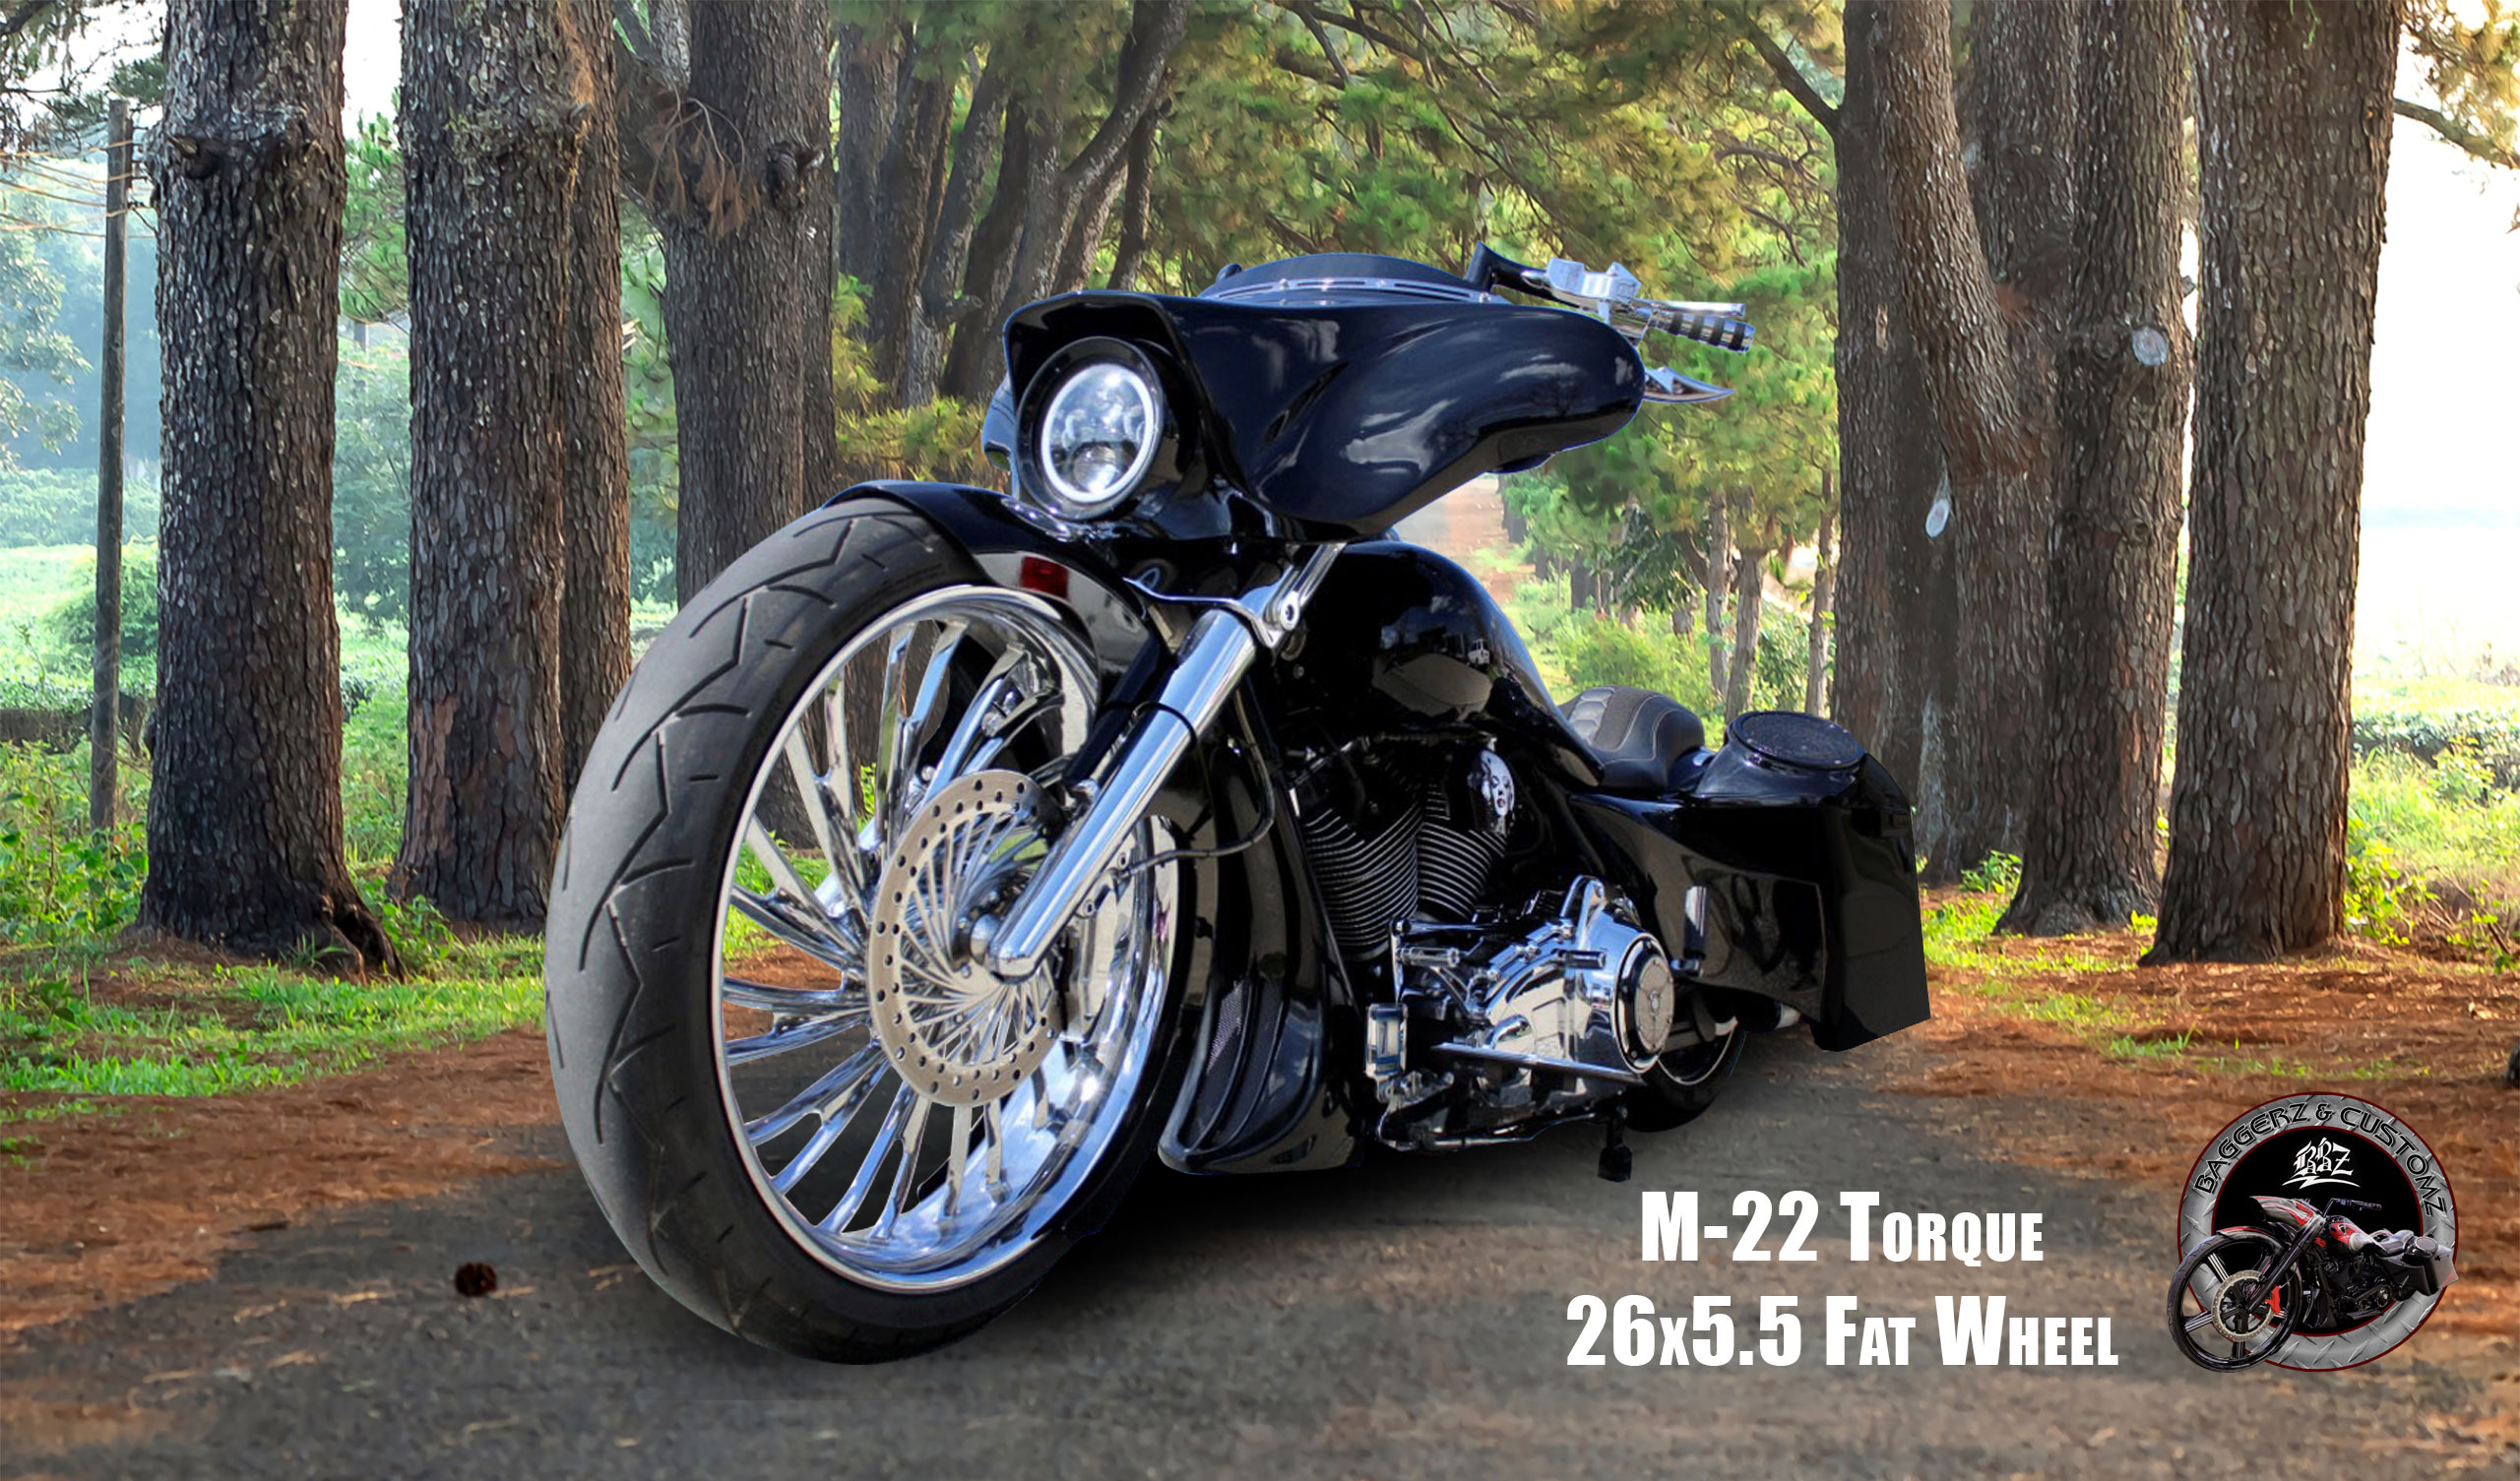 The 26x5.5 Wheel featuring the M-22 Torque